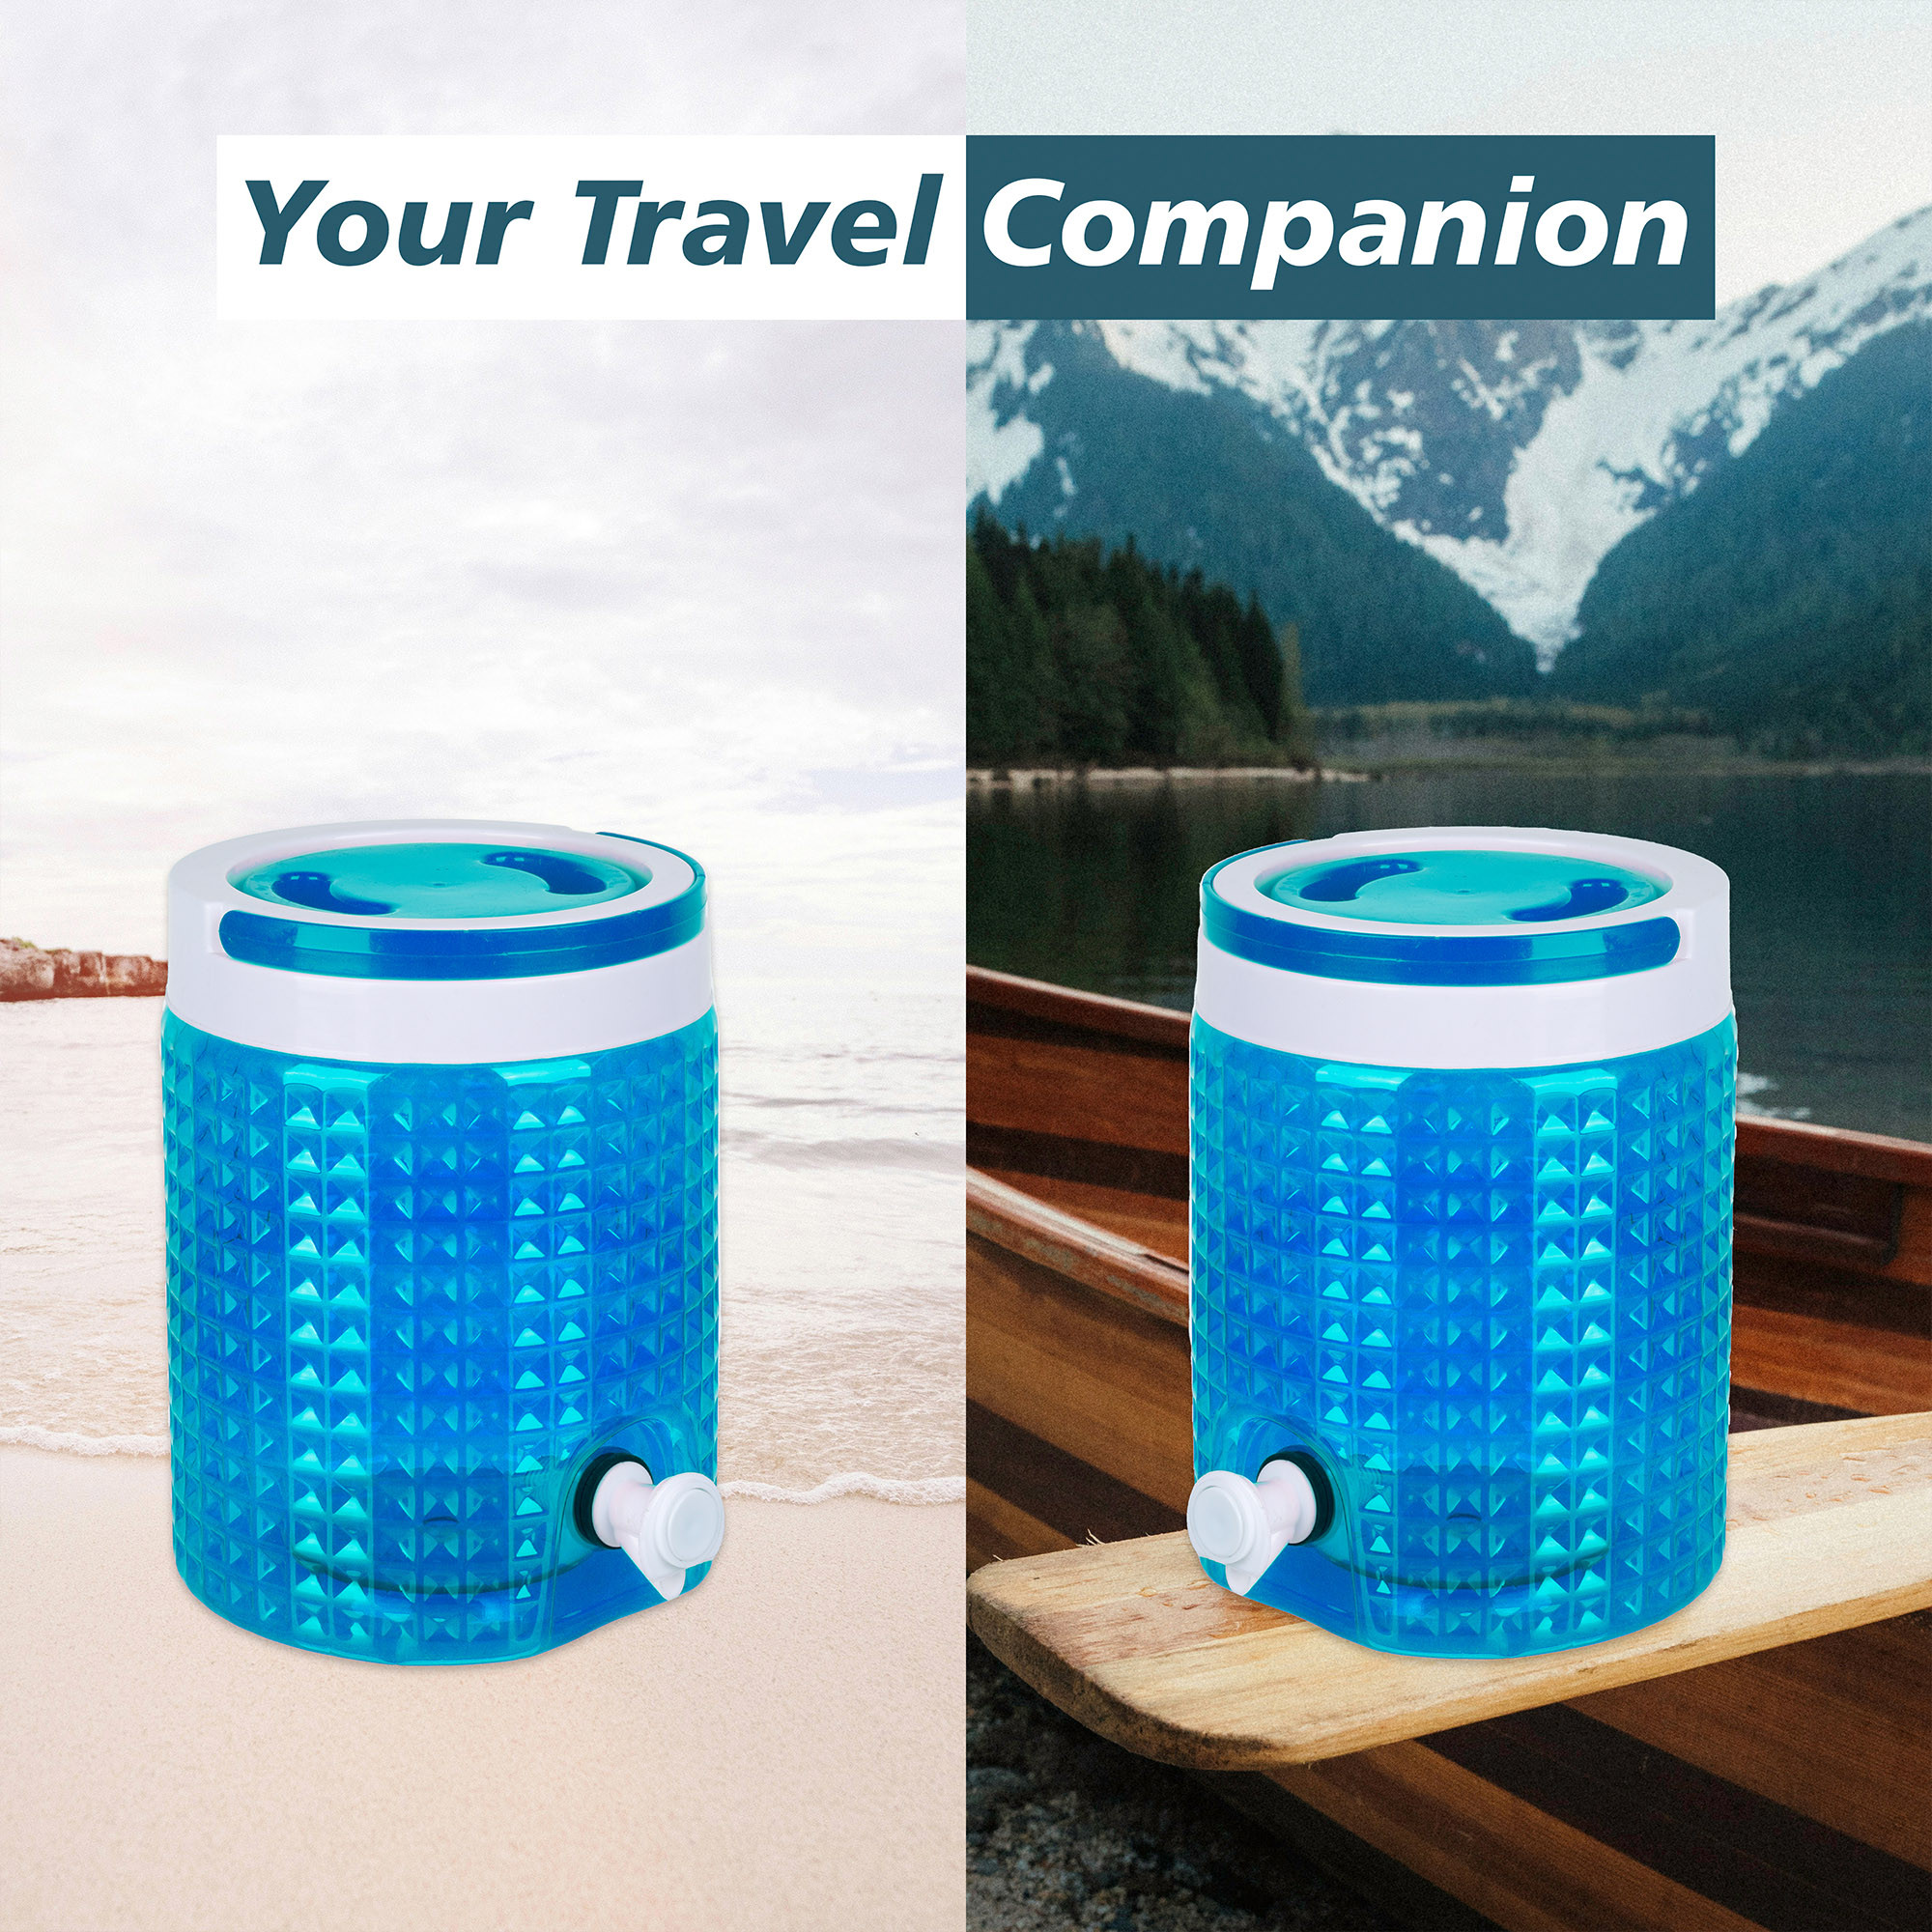 Kuber Industries Water Camper | Travelling Water Jug | Water Jug Camper for Home-Travel-Picnic-Office | Water Dispenser Can | Jug with Tap | Water Storage Container | 4.5 LTR | Blue